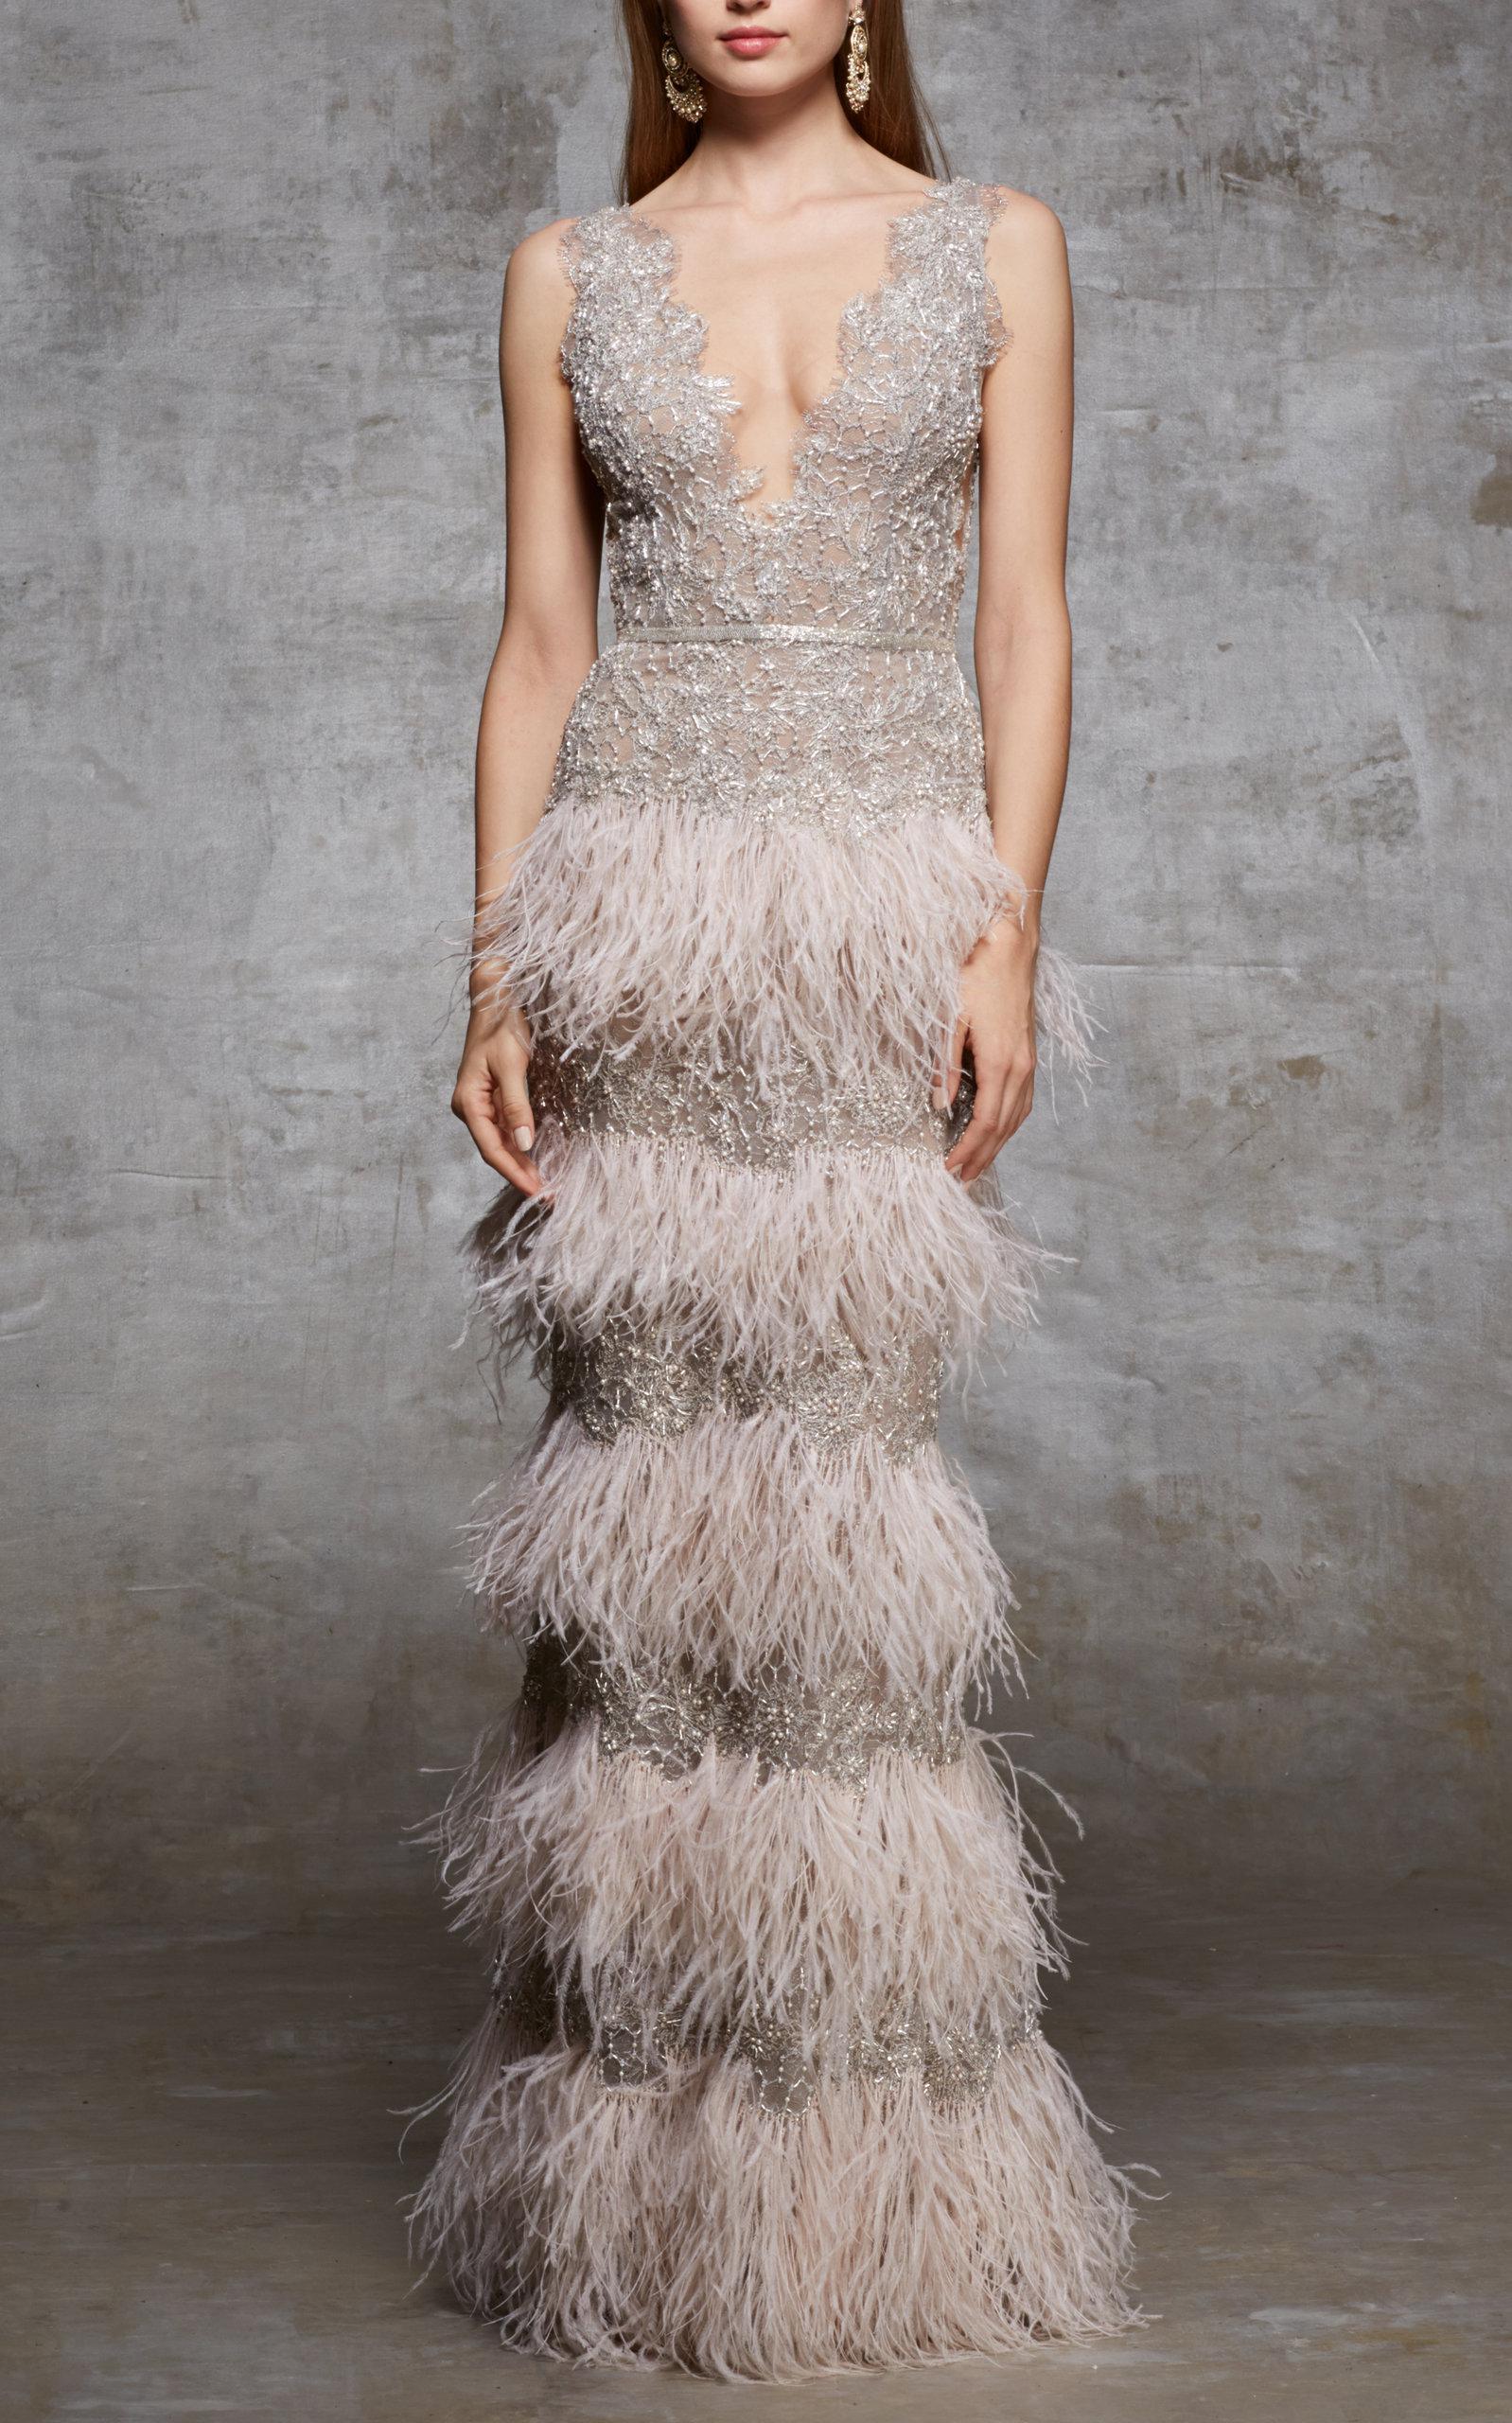 Ostrich Feather Gown 